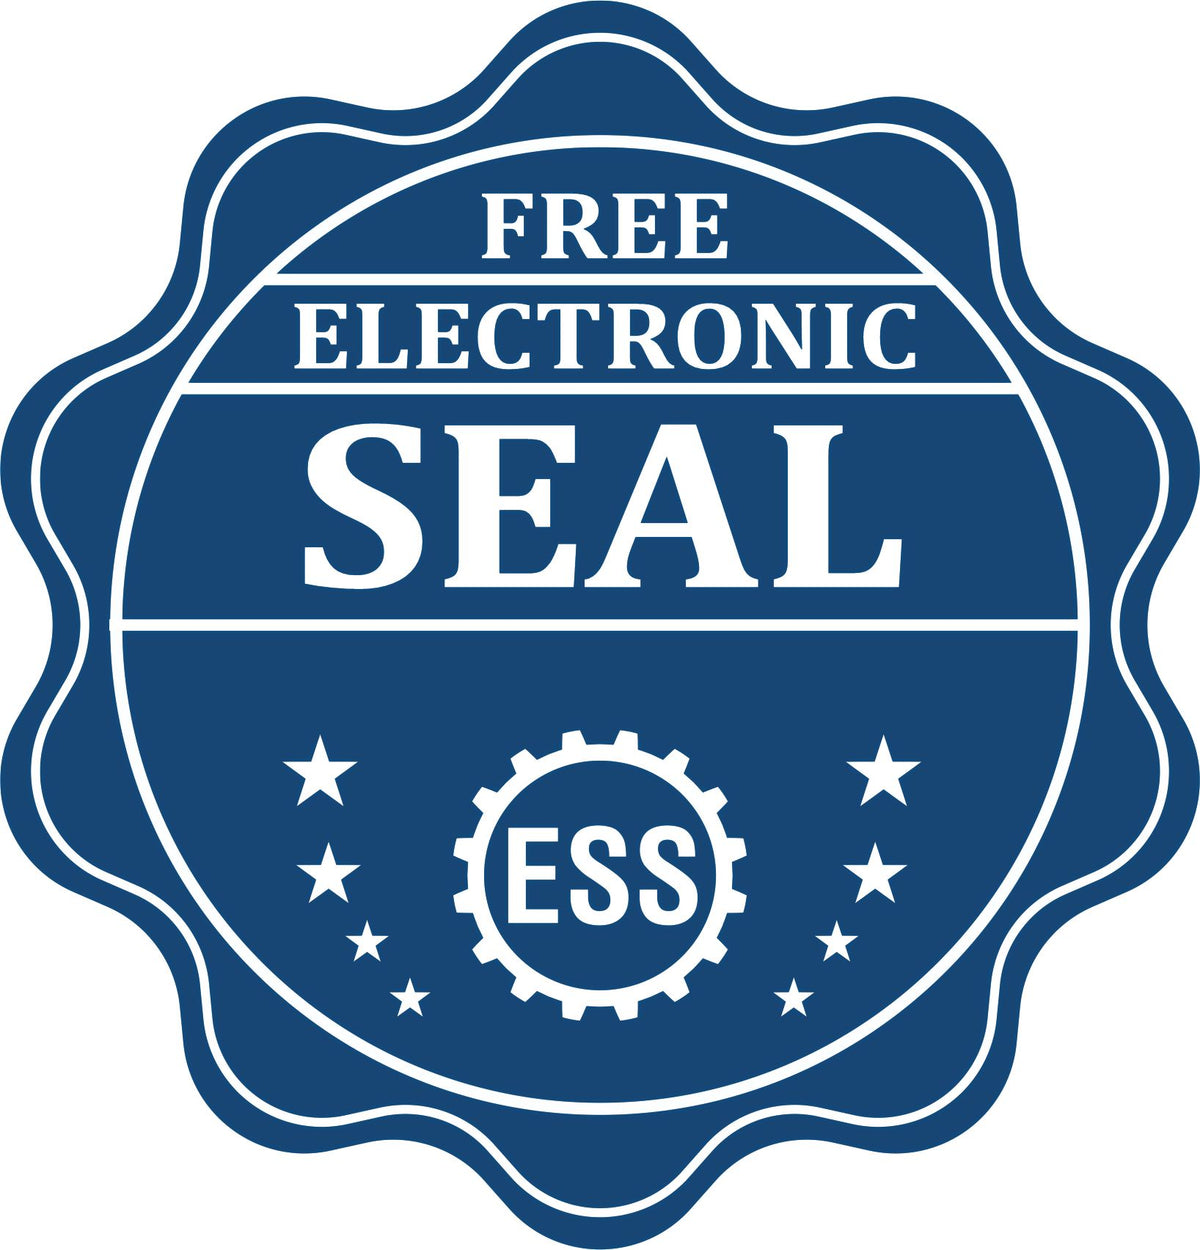 A badge showing a free electronic seal for the Handheld Indiana Land Surveyor Seal with stars and the ESS gear on the emblem.